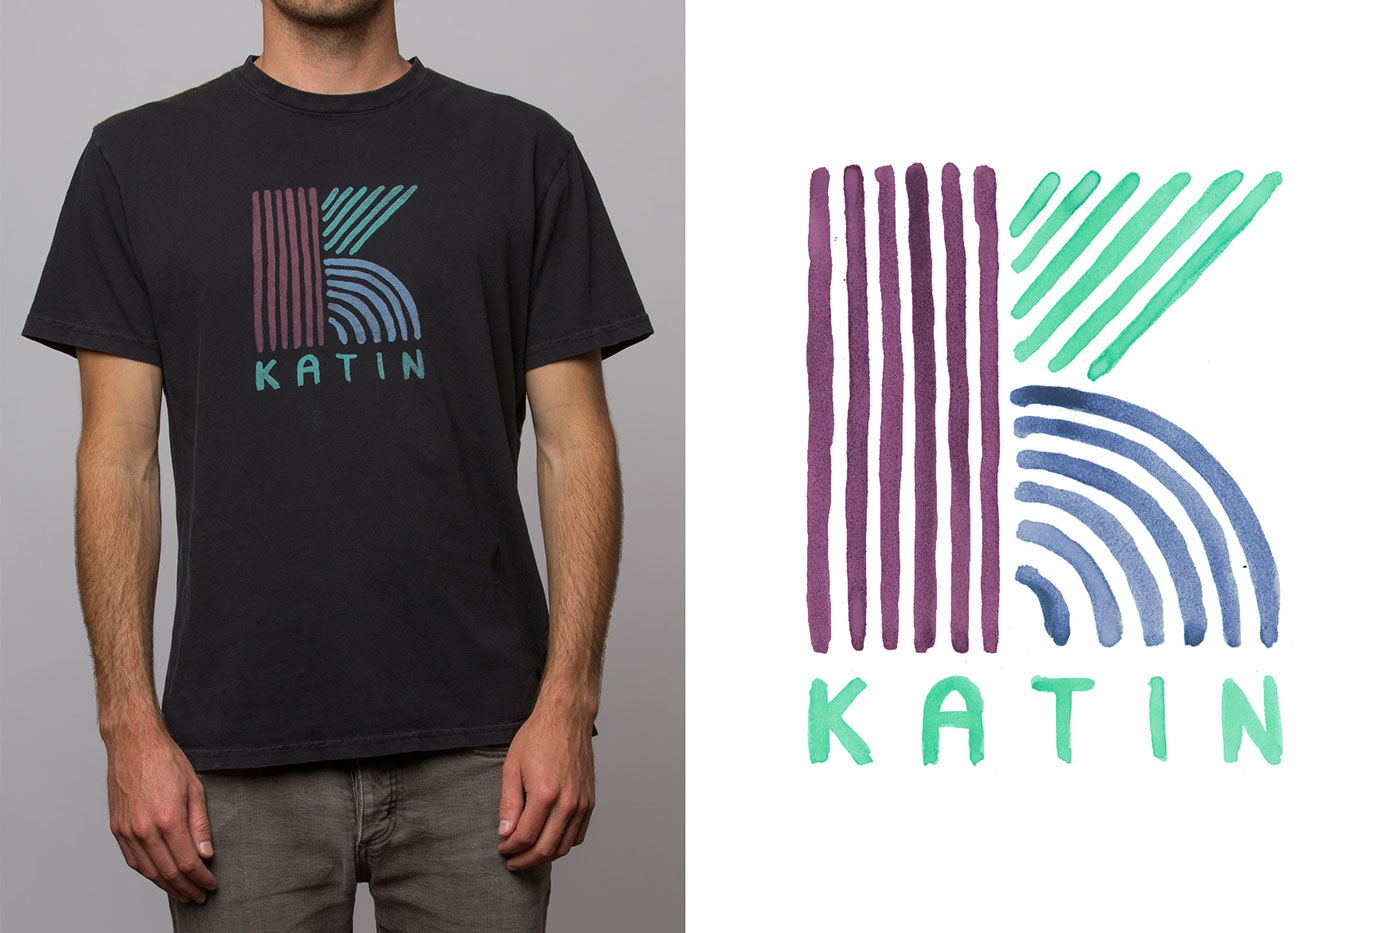 Katin T-Shirt Design Surf California action sports hand drawn Surf Culture surfing shirt design hand crafted apparel Apparel Design